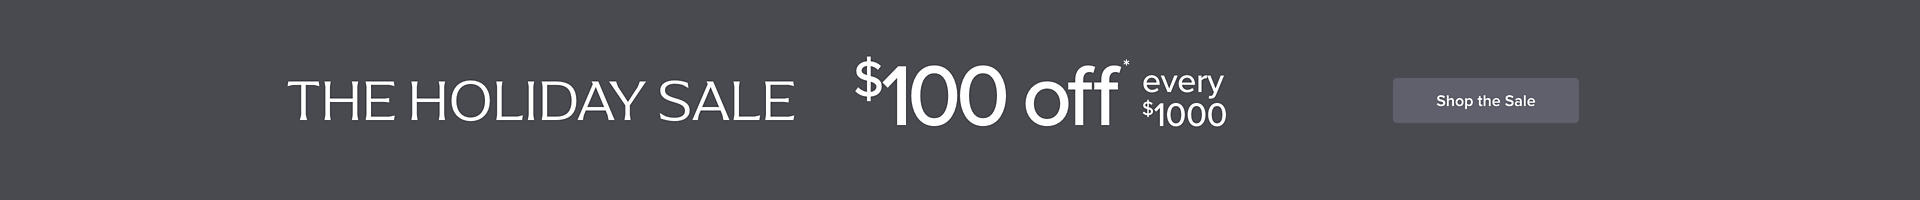 $100 Off Every $1000